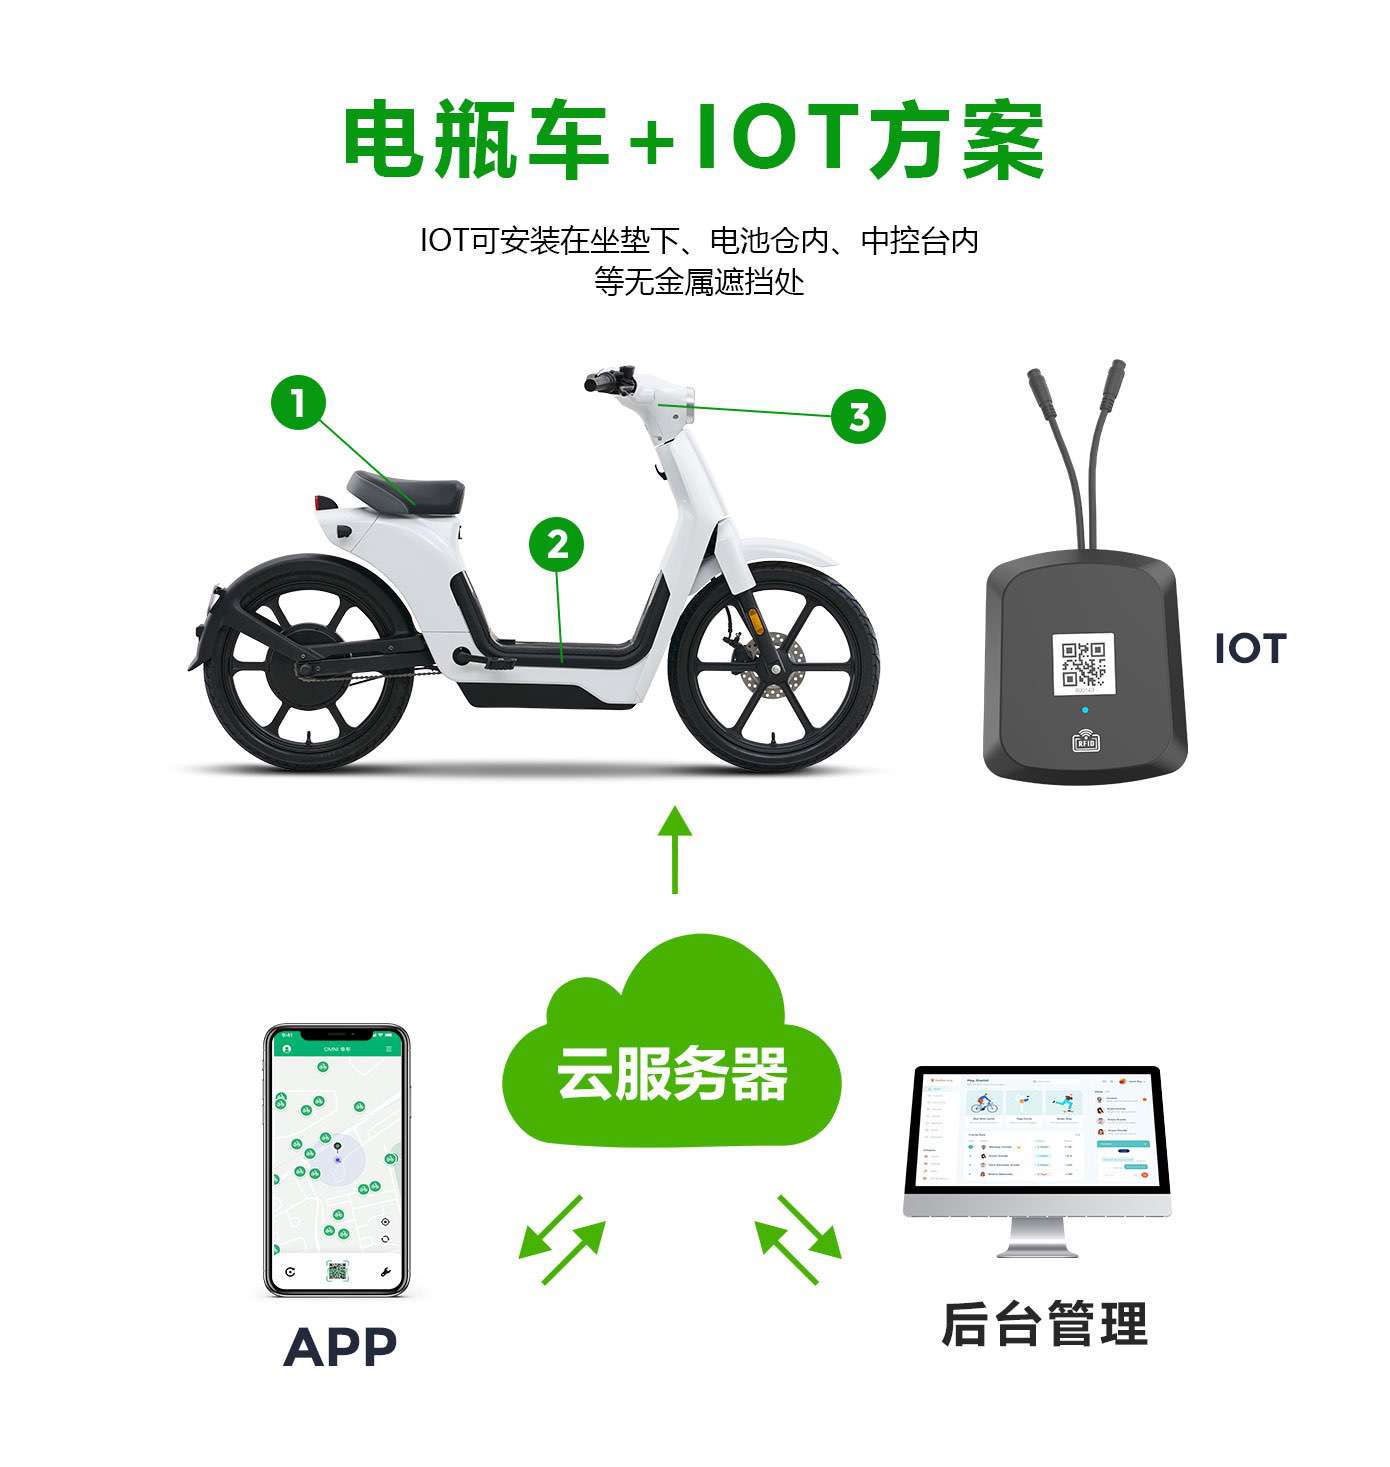 Moped+IOT